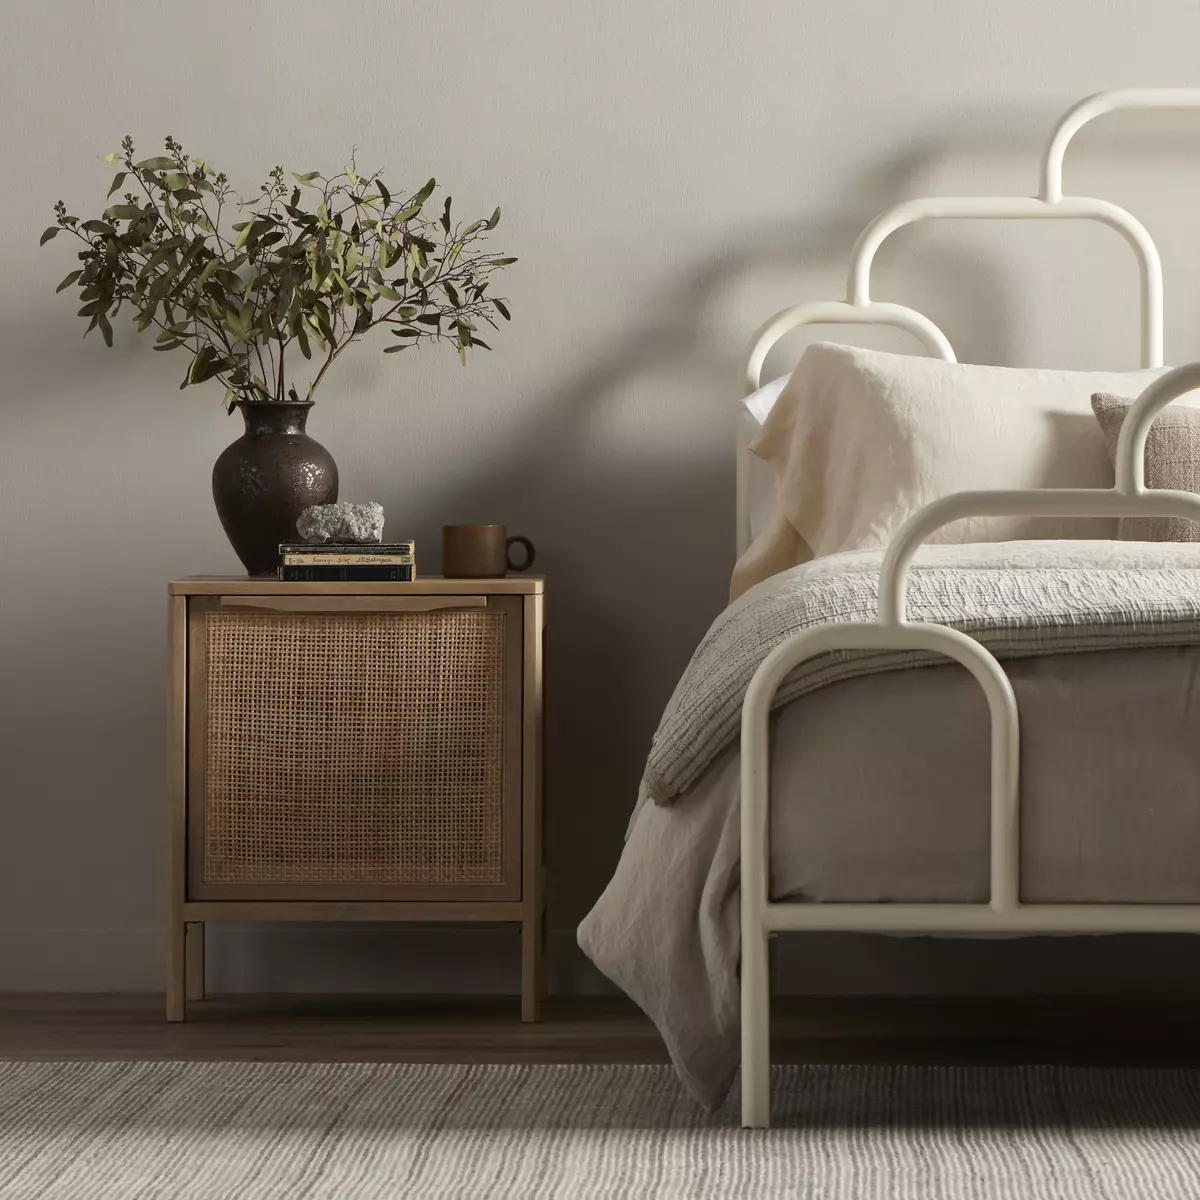 Four Hands Sydney Bed - Natural - Twin